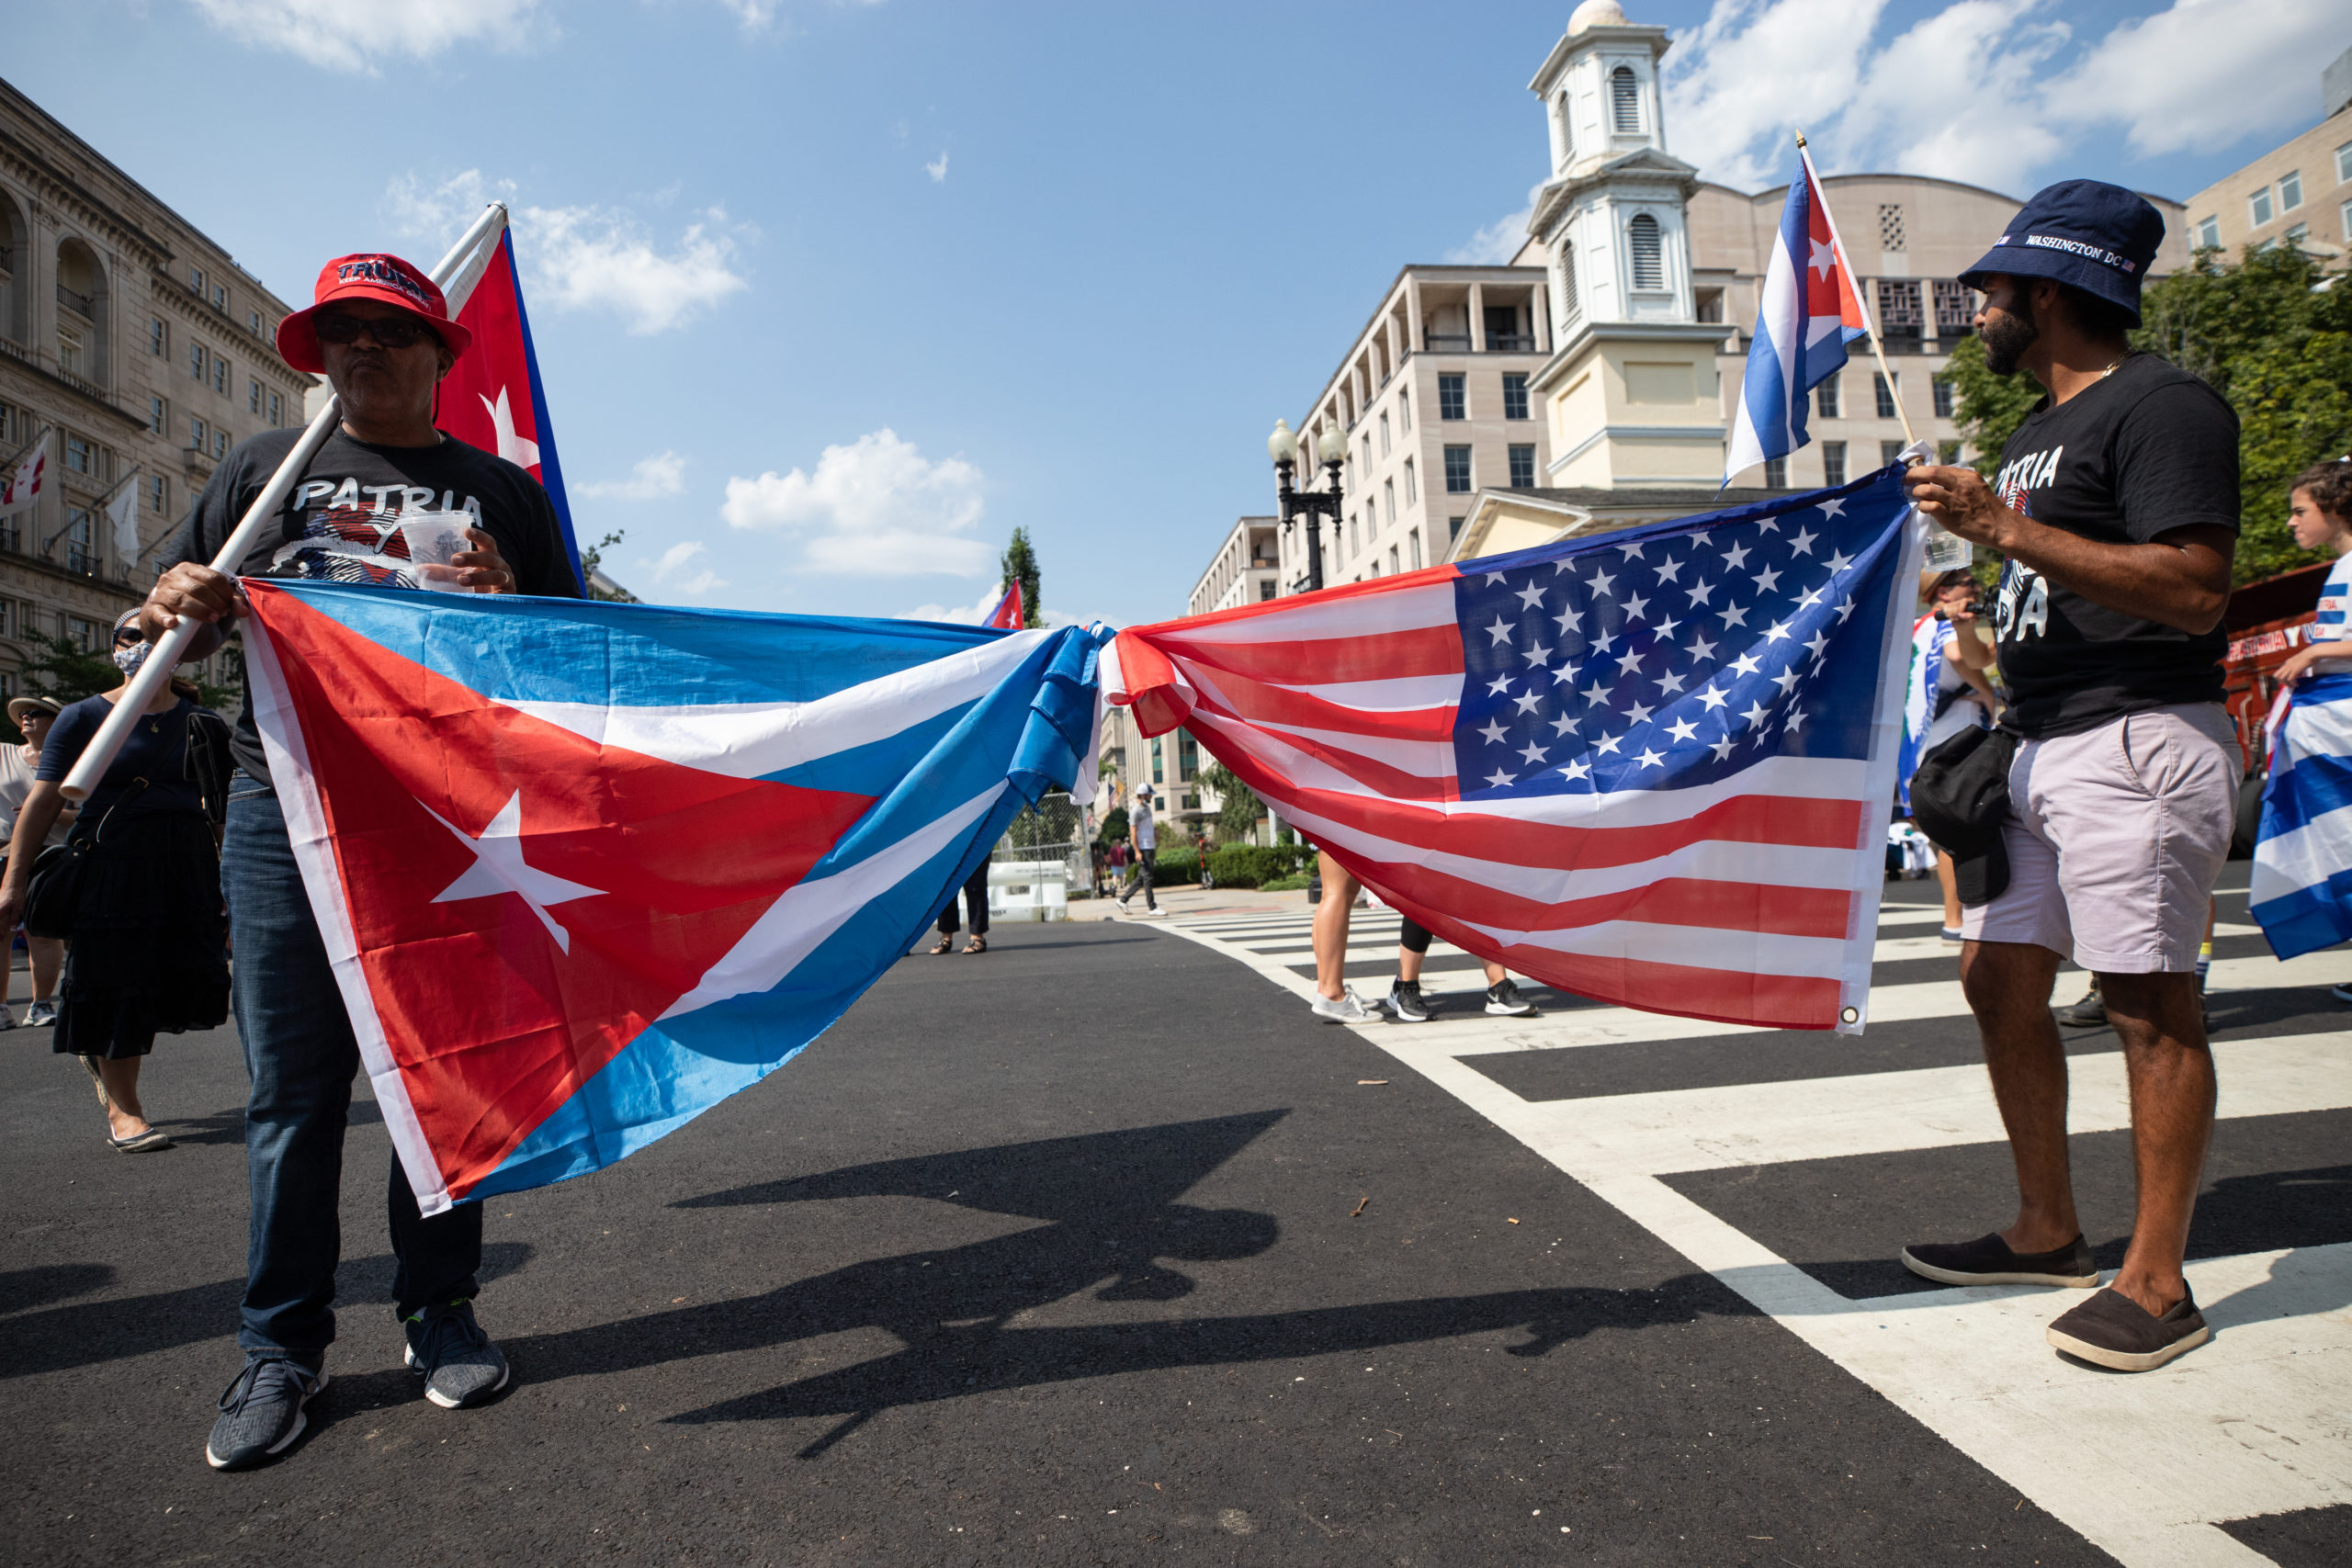 Demonstrators participated in a rally for Cuban freedom near the White House where attendees asked President Joe Biden to intervene and end communist rule over the country, in Washington, D.C. on July 26, 2021. (Kaylee Greenlee - Daily Caller News Foundation)